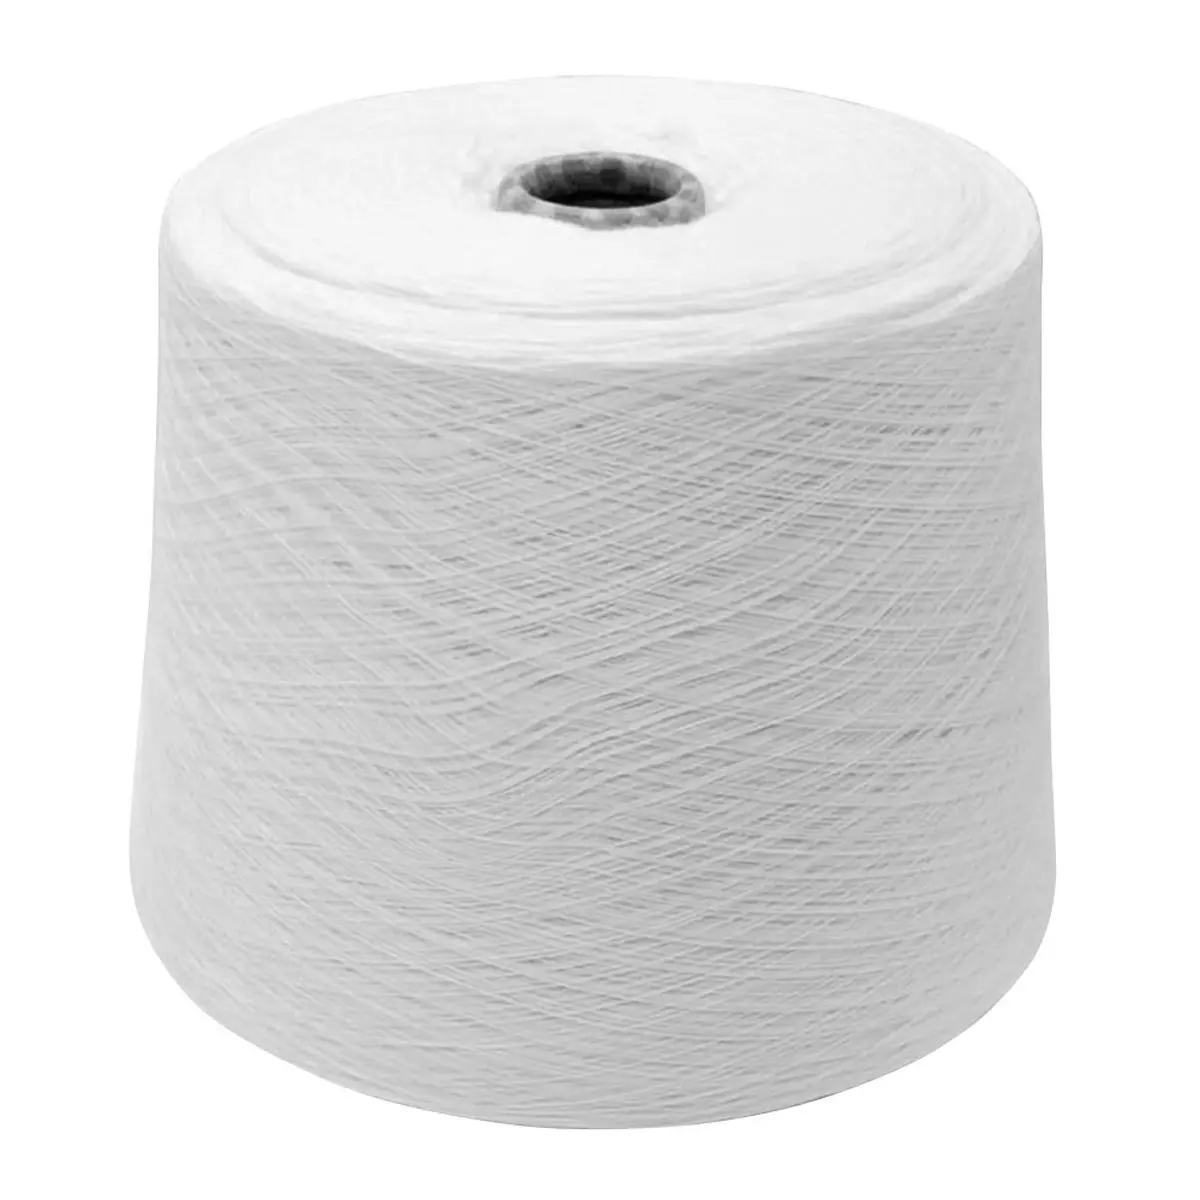 100 % quality cotton yarn for textile production guarantee of quality goods